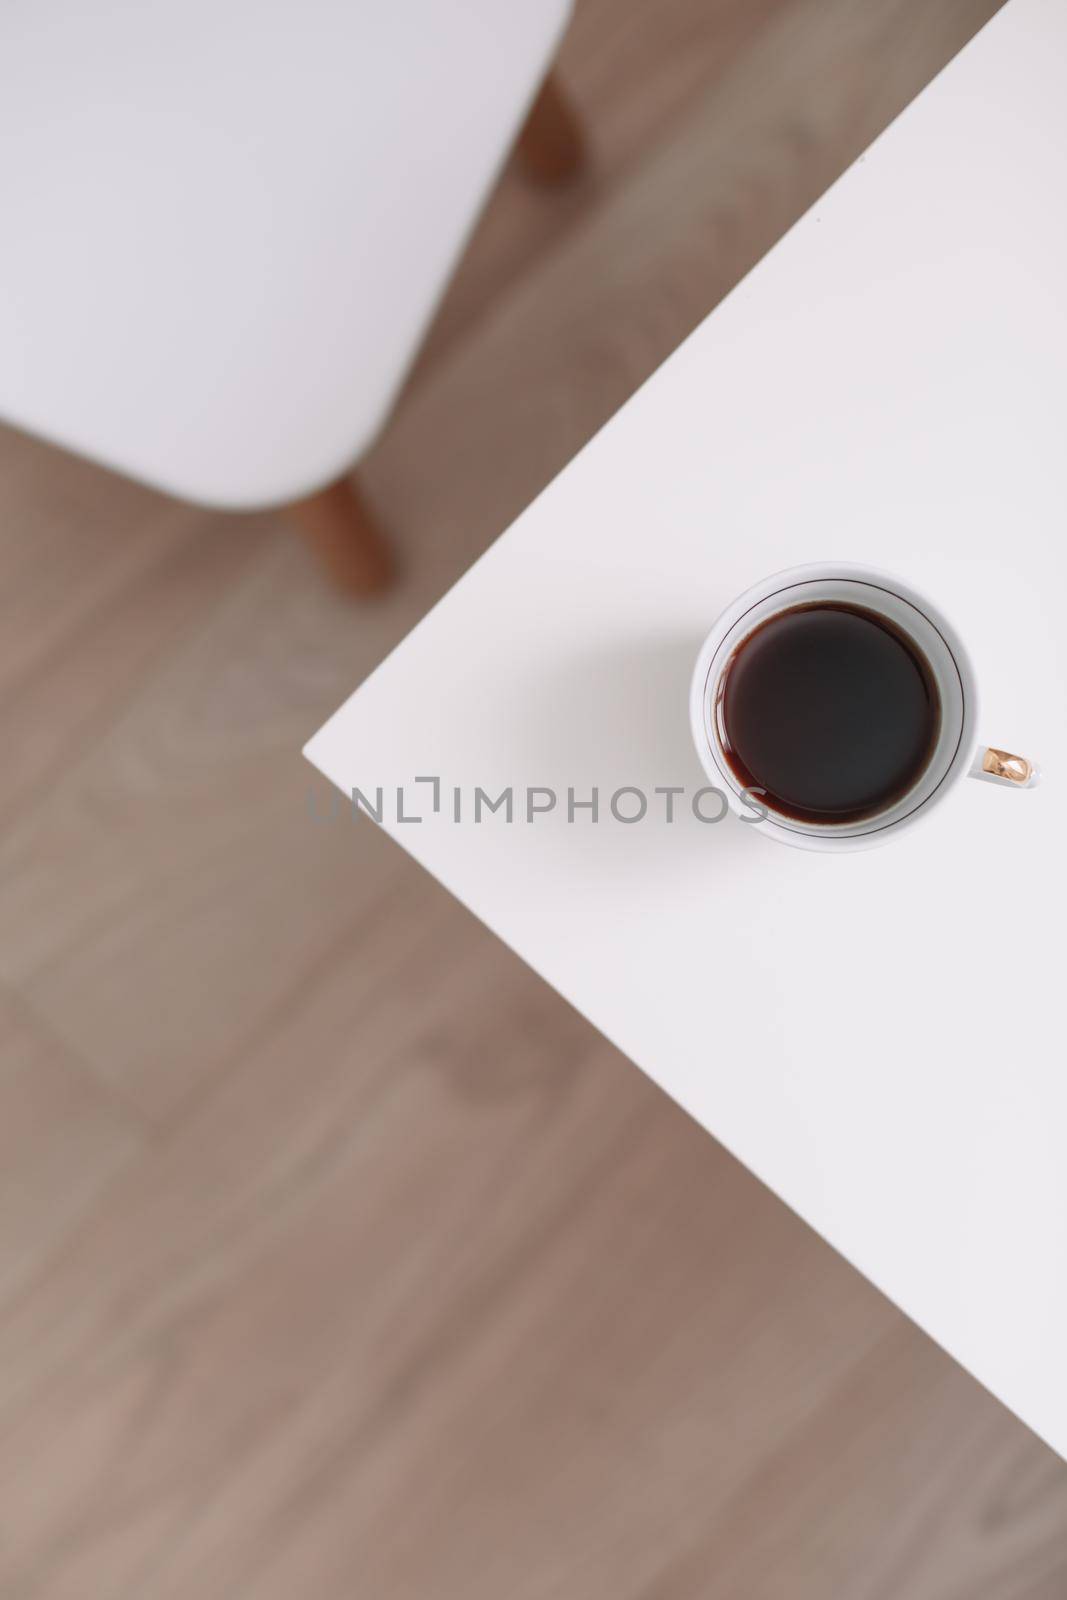 Good morning banner. Cup of coffee on a table. Minimal concept. Food Photography with copy space.